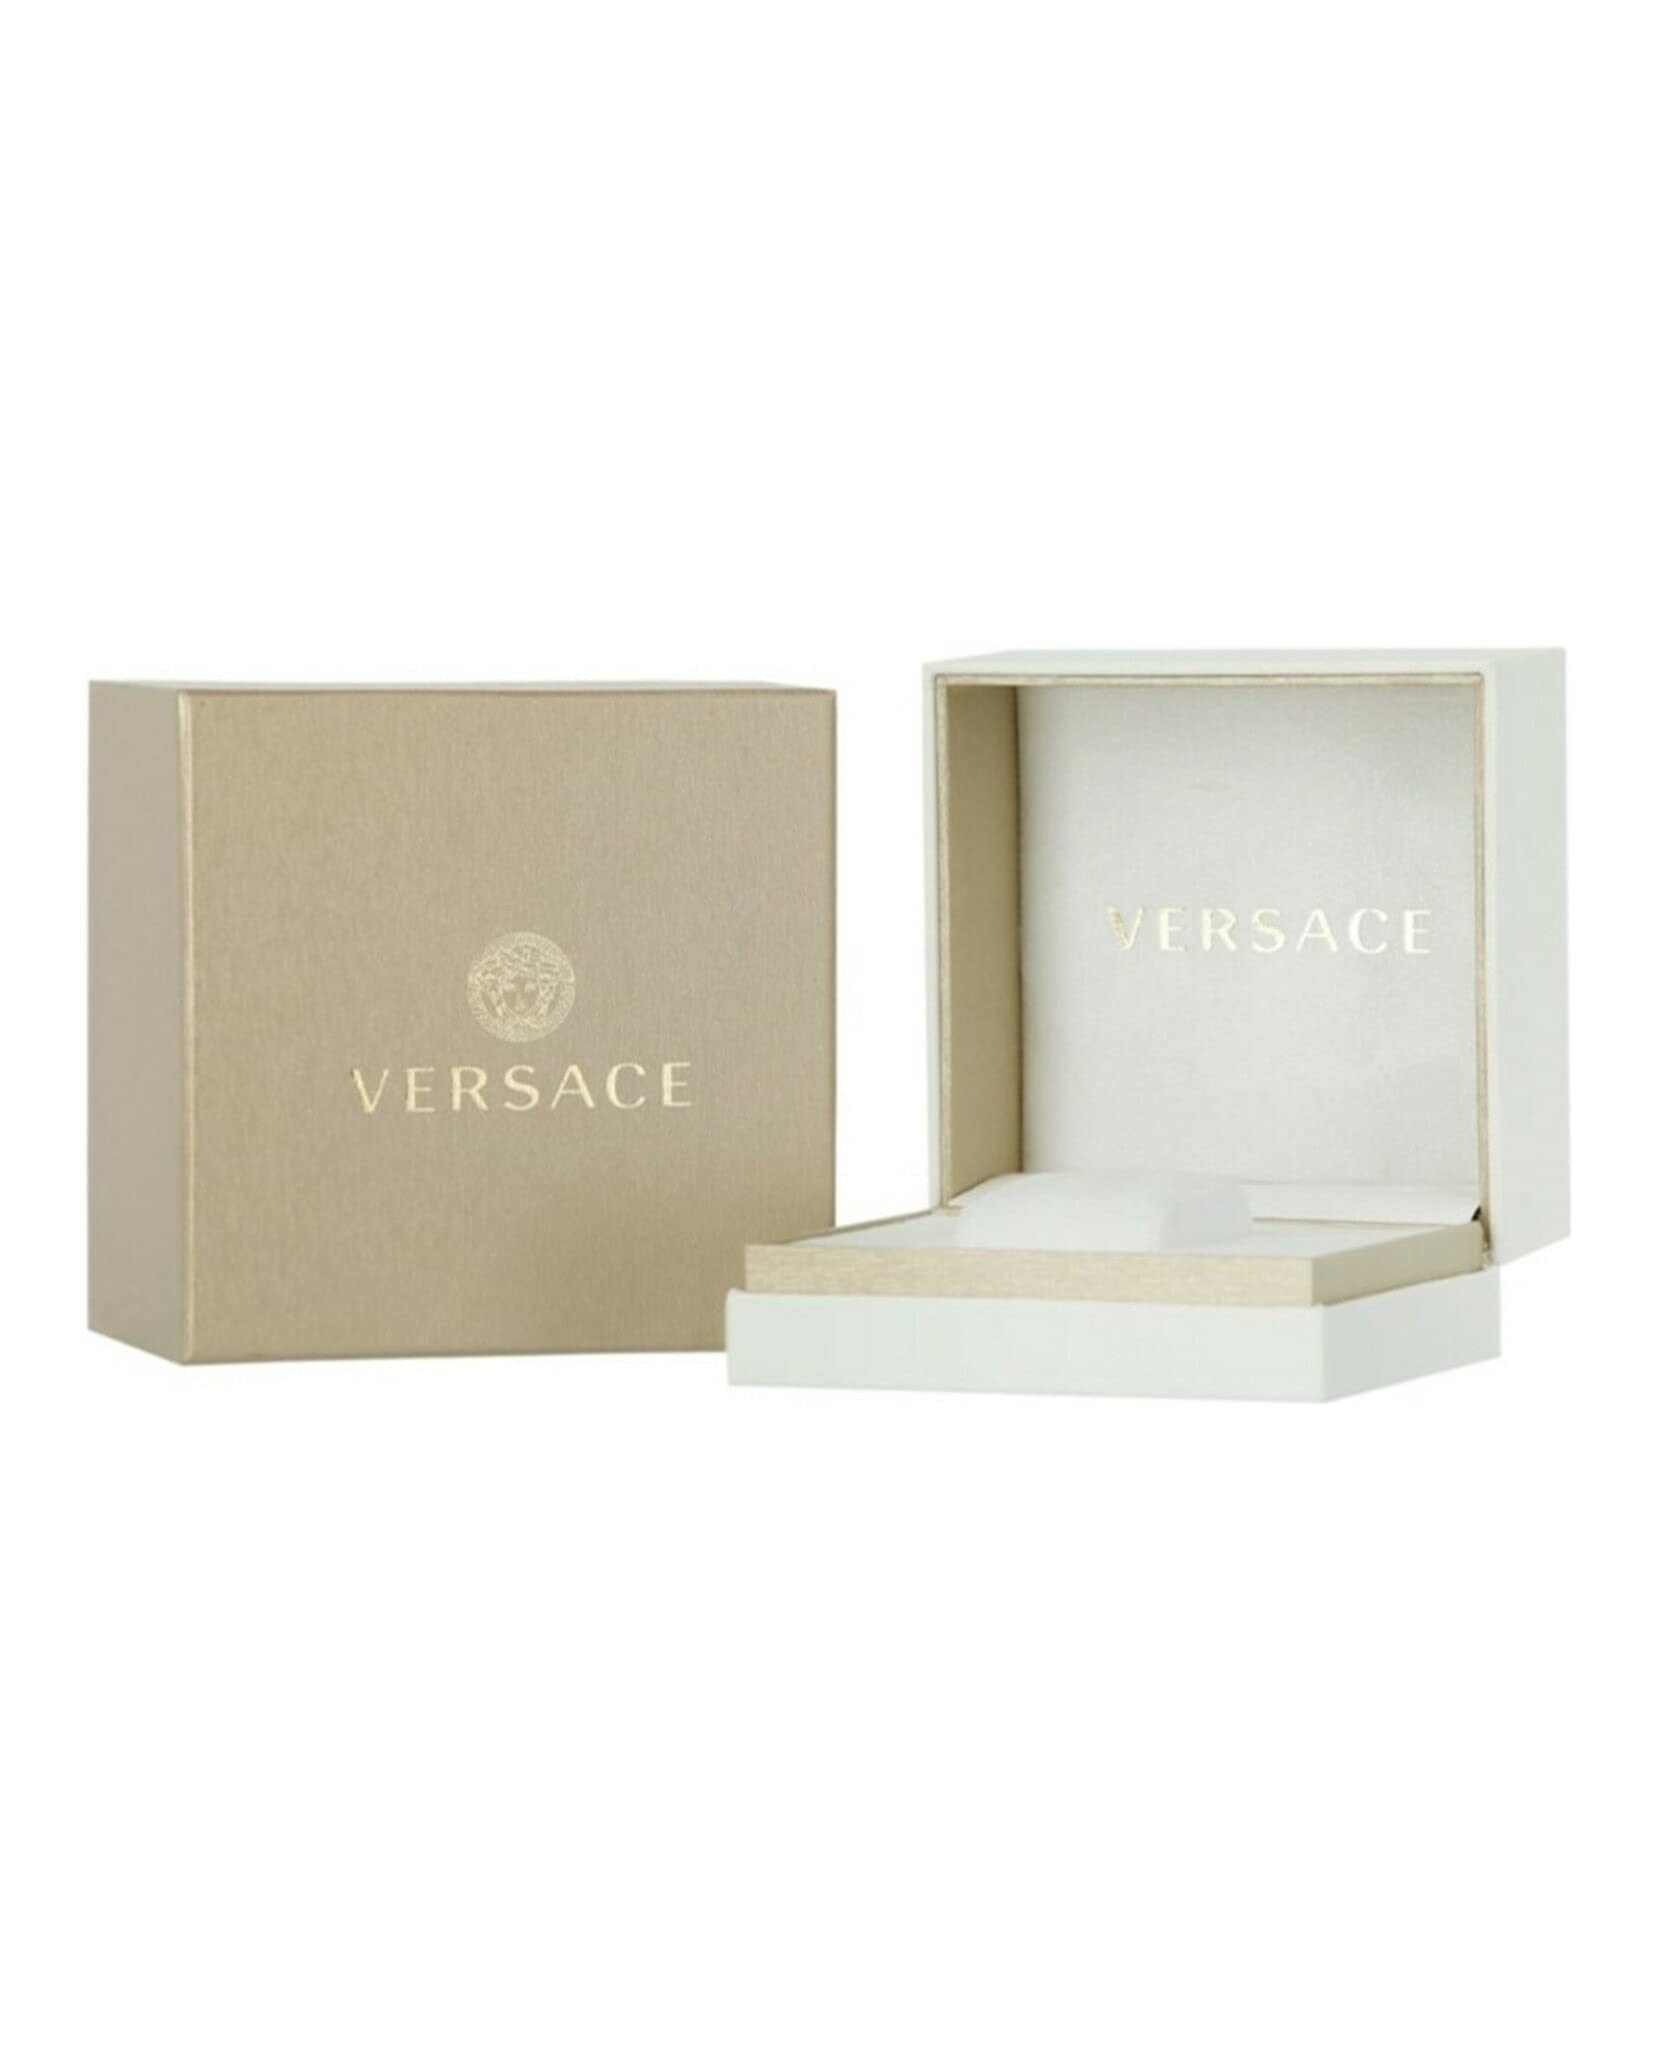 Versace Greca Sport Collection Luxury Mens Watch Timepiece with a Two Tone Bracelet Featuring a Two Tone Case and Black Dial